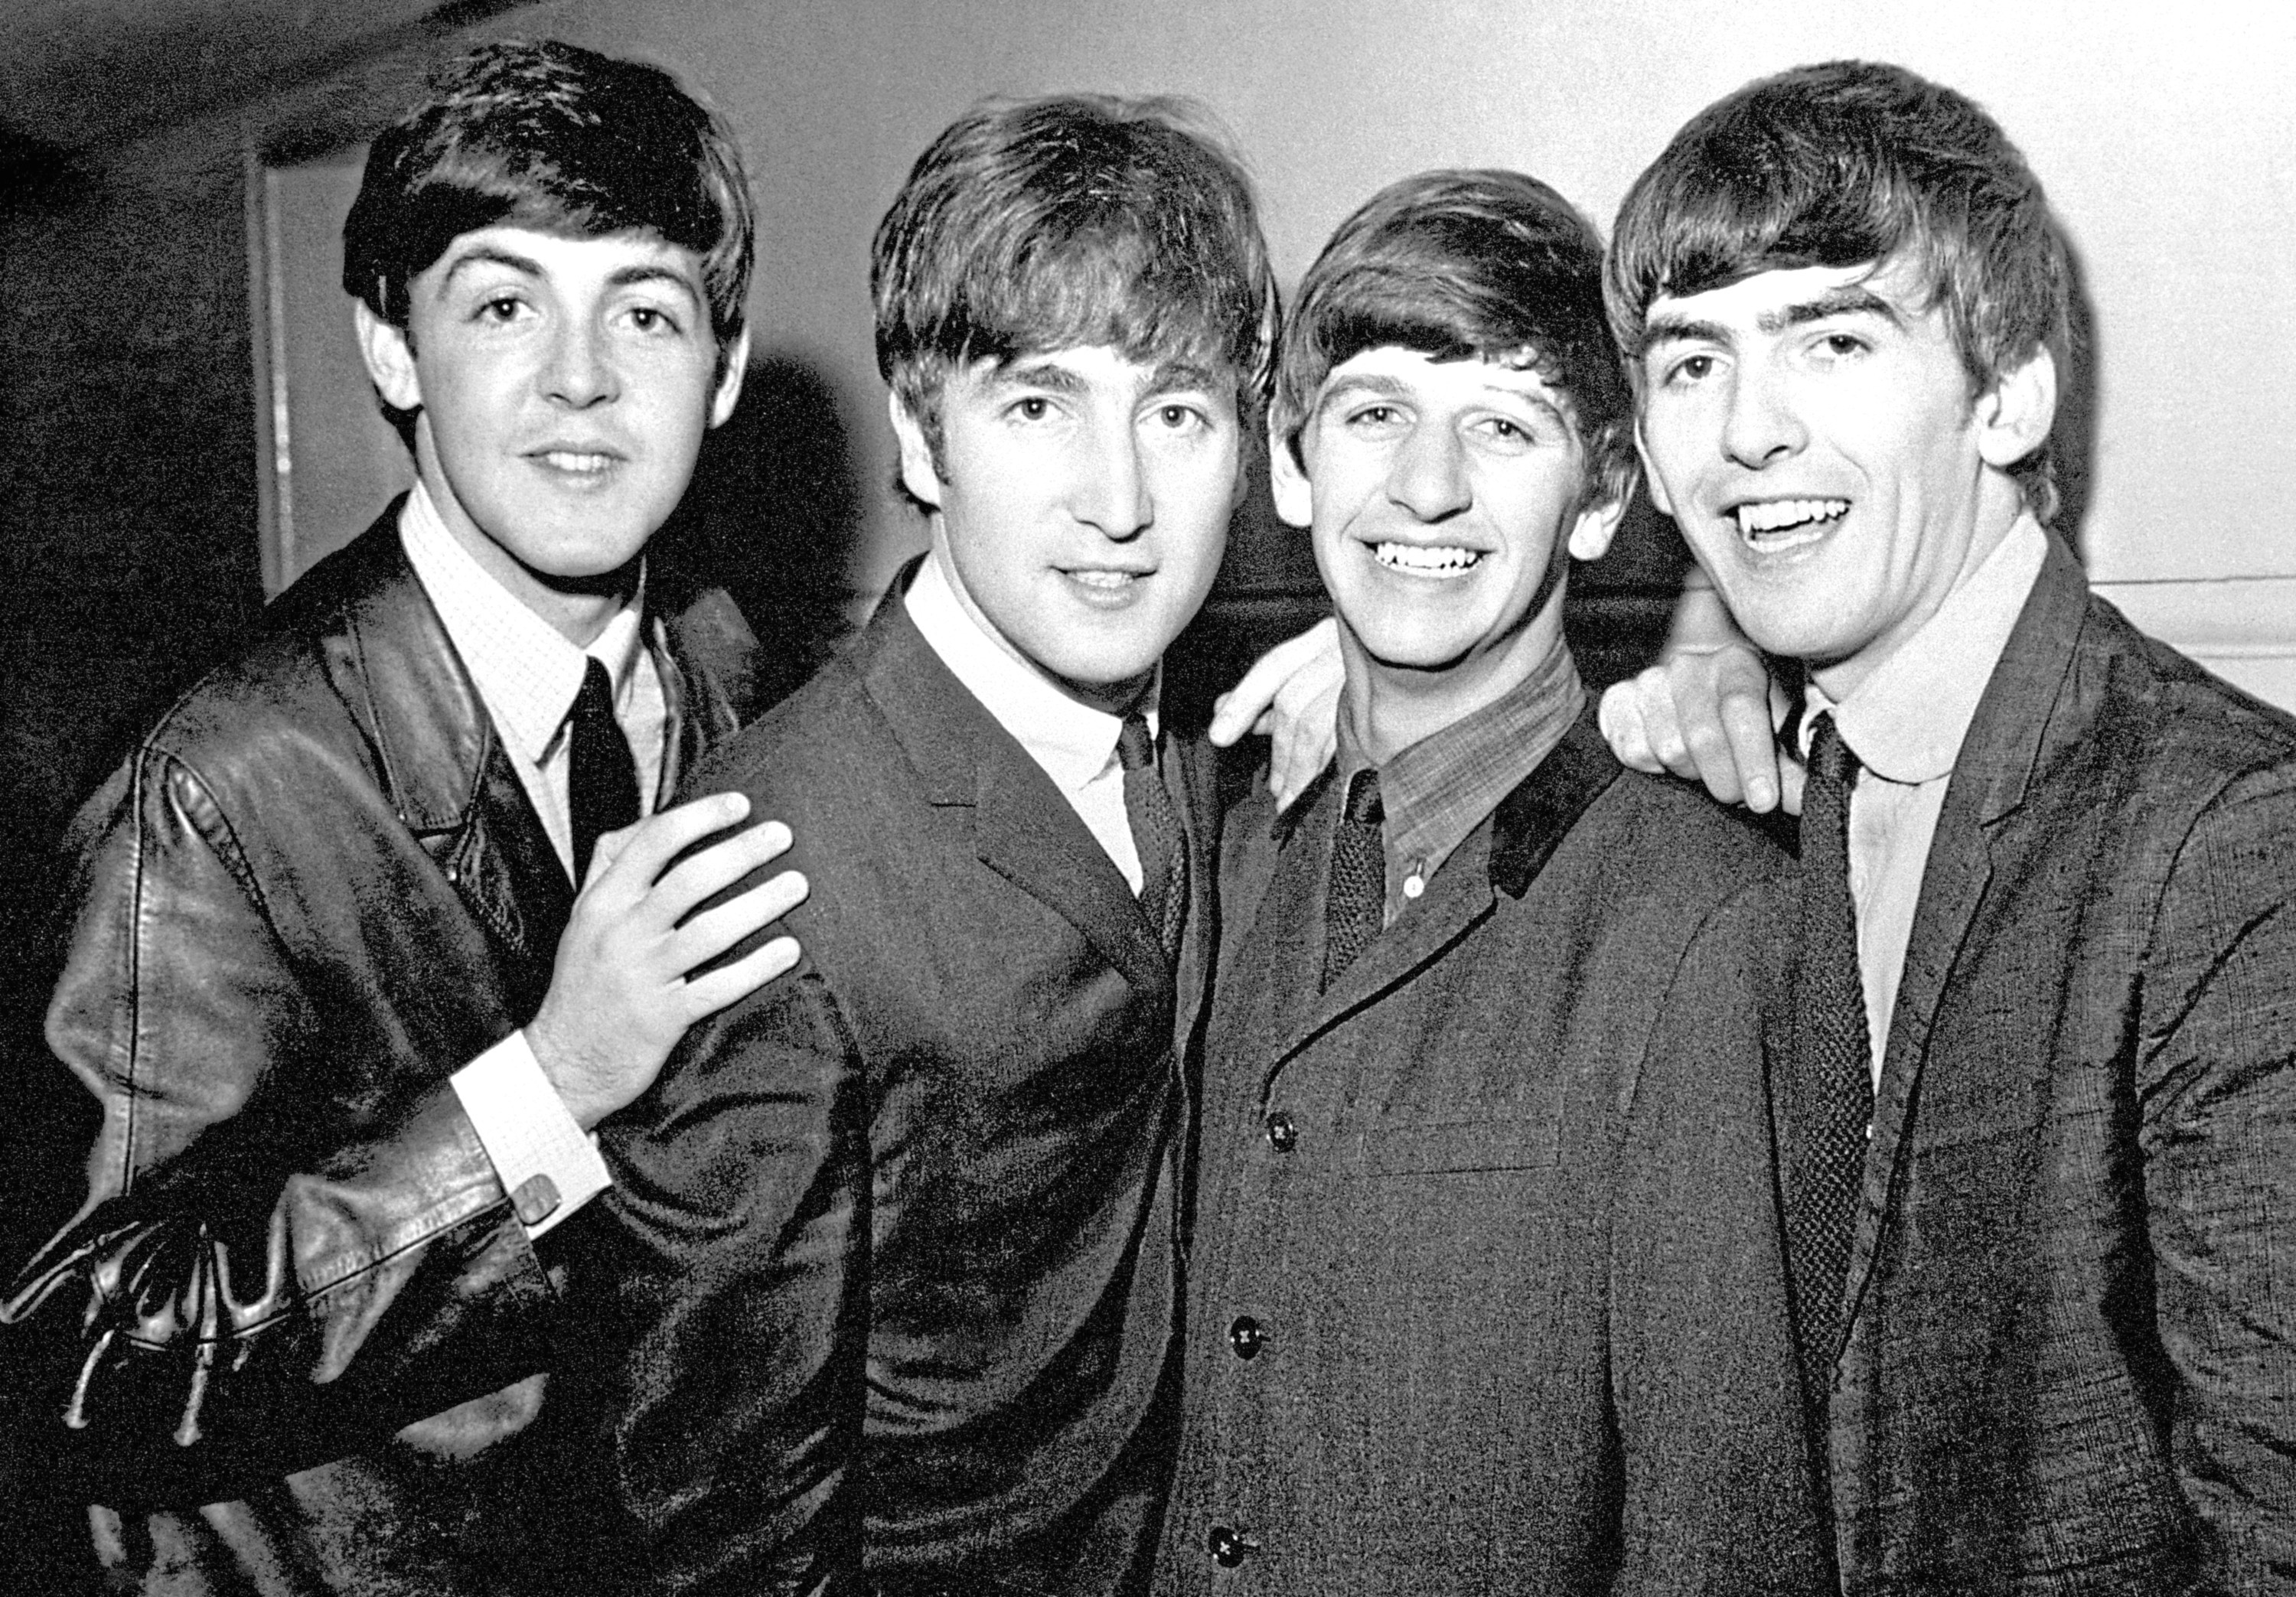 The Beatles in 1963